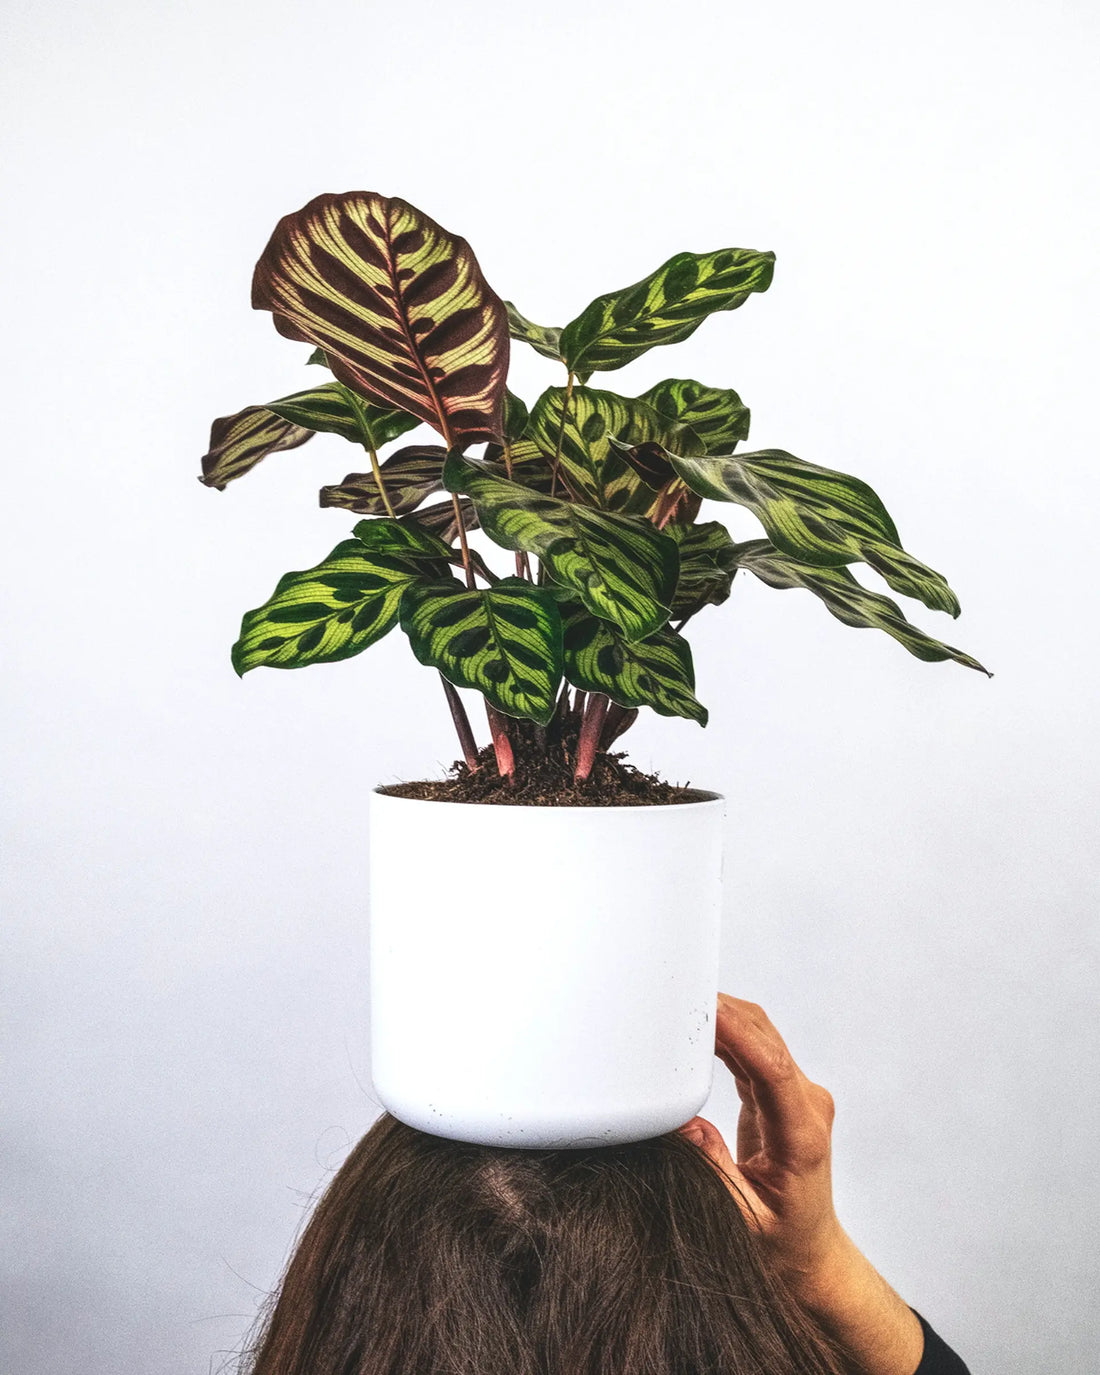 How To Take Care Of Your Calathea